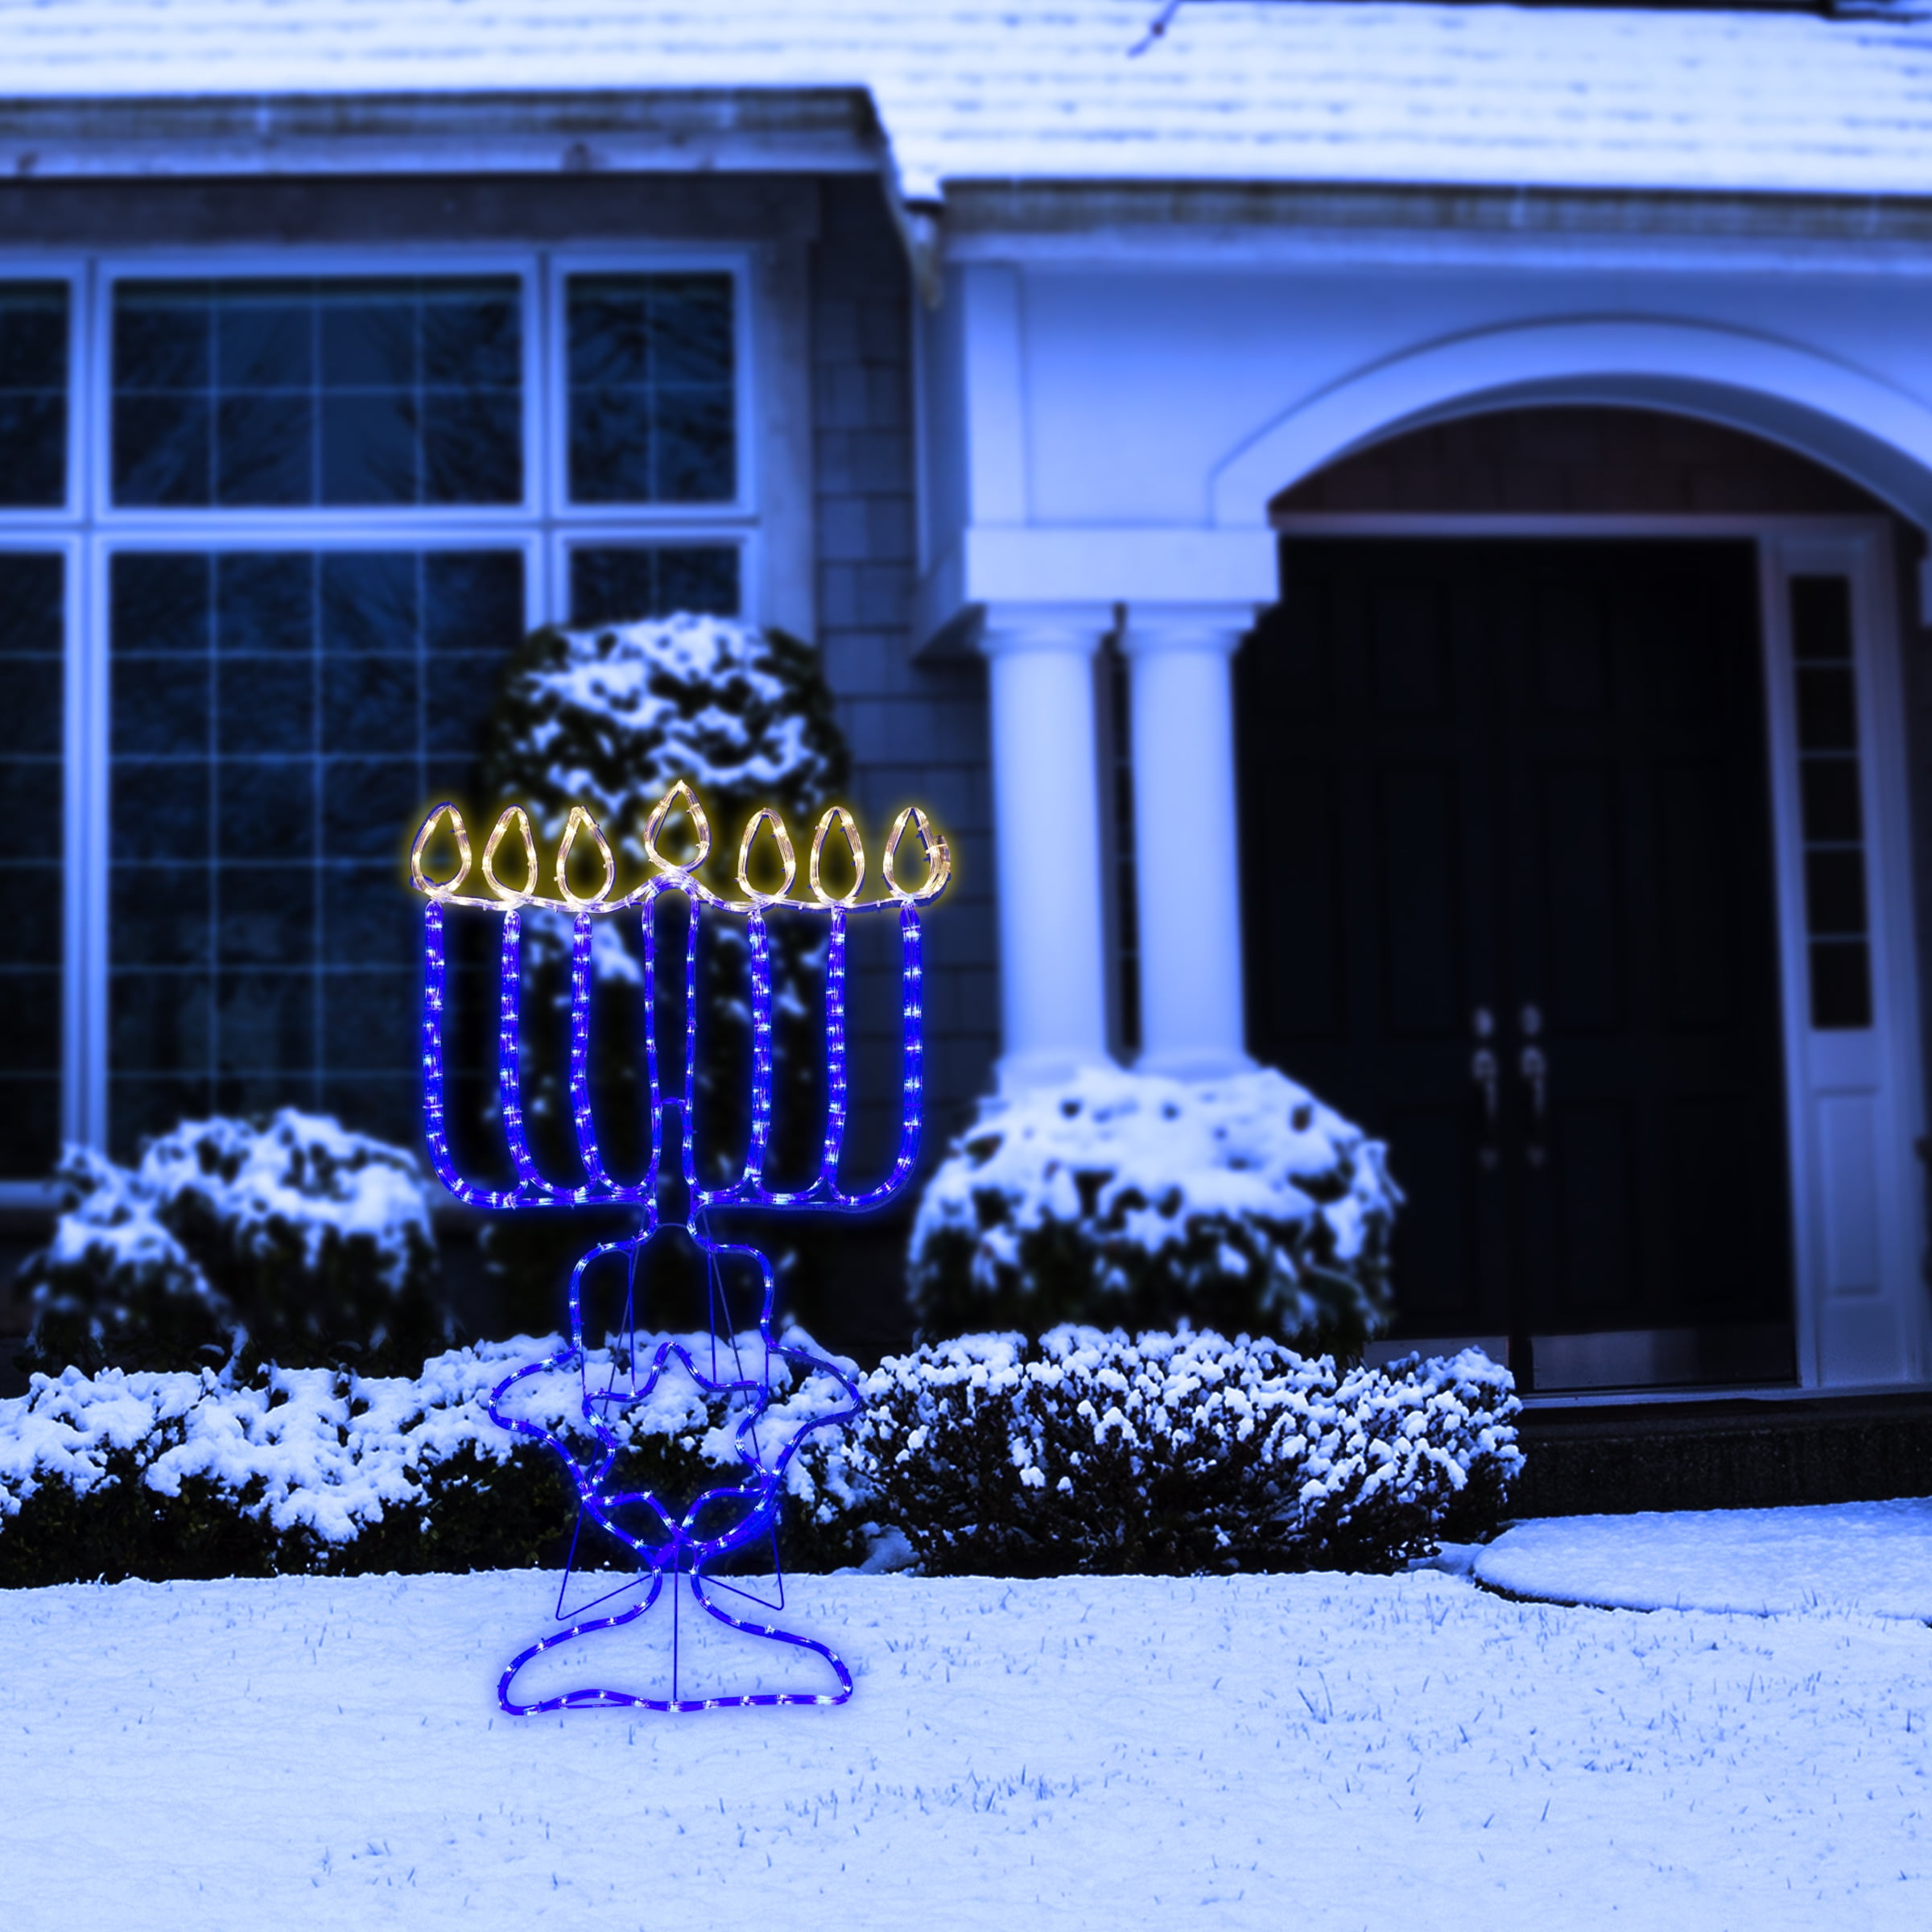 17 Hanukkah decorations to help you celebrate this year | CNN Underscored